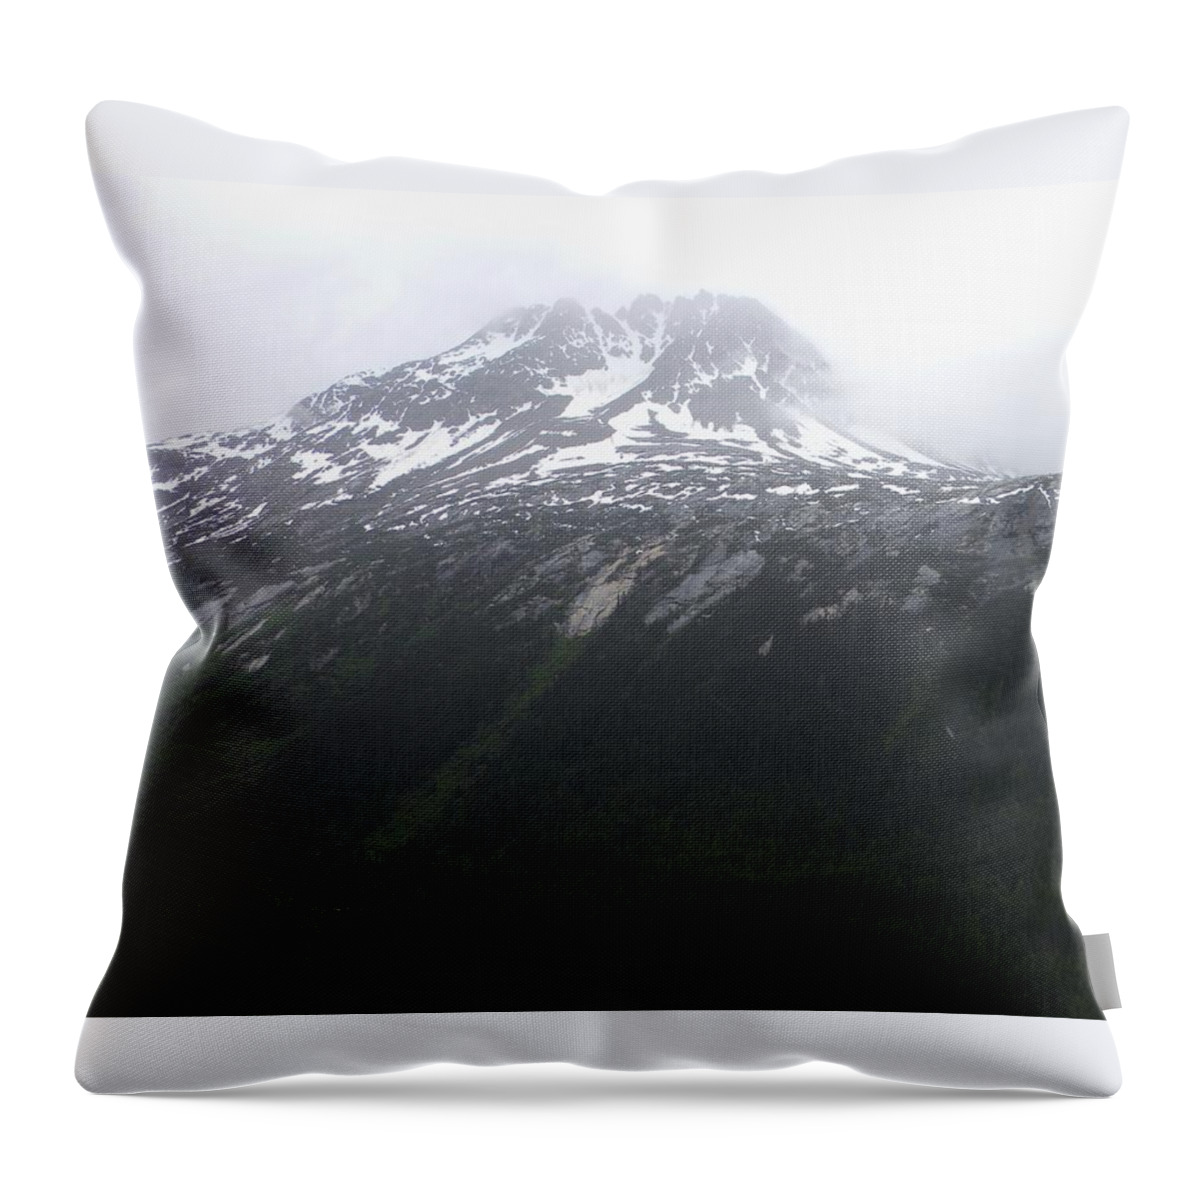 Snow Capped Mountain Throw Pillow featuring the photograph Snow Capped Mountain by Warren Thompson